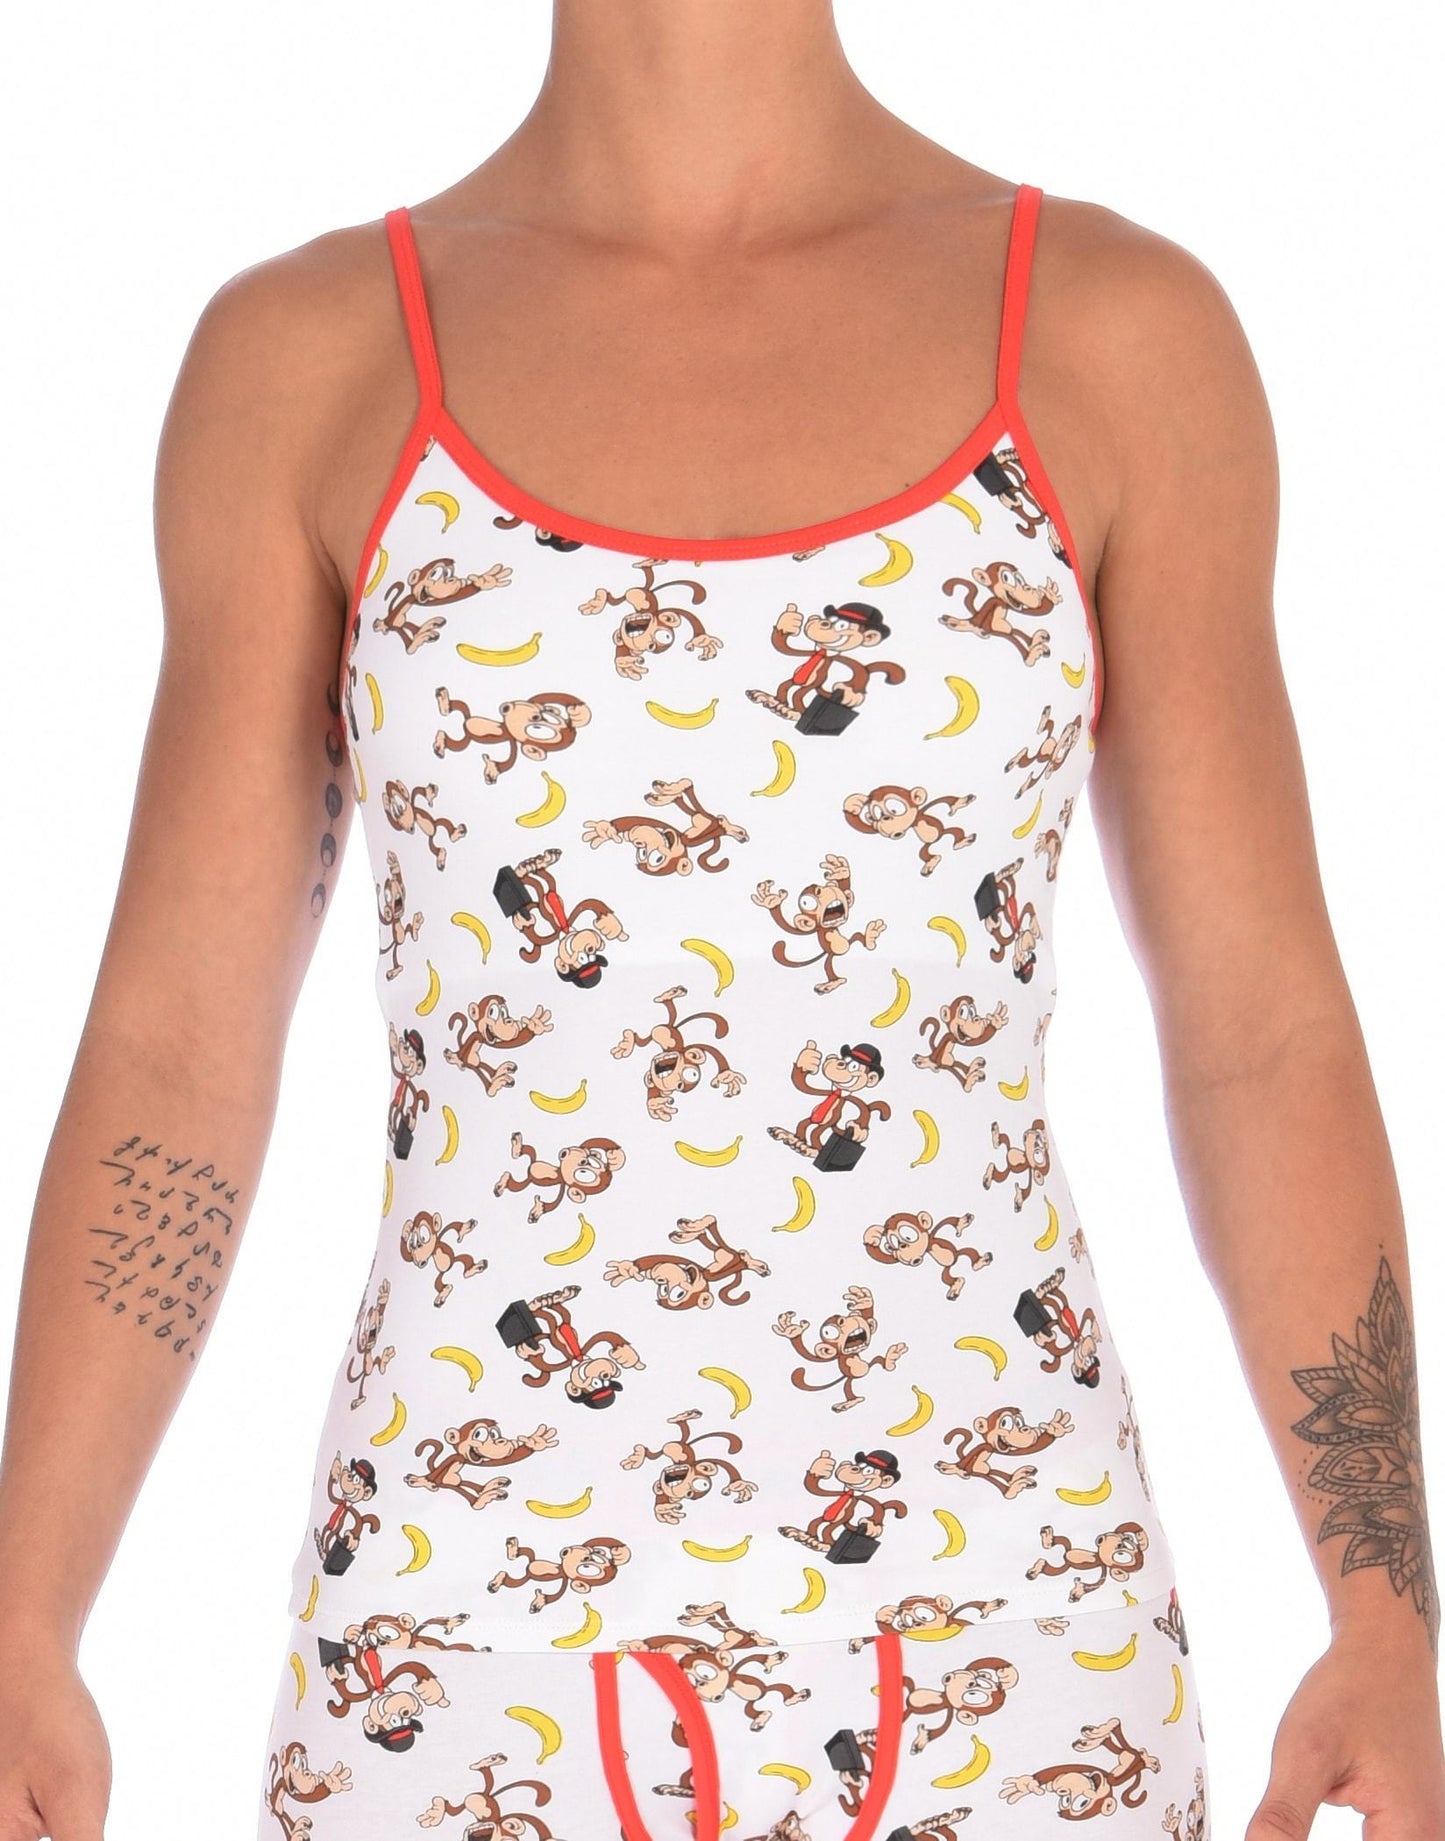 GG Ginch Gonch Gone Bananas cami camisole spaghetti strap women's long underwear white fabric with monkeys and bananas red trim front